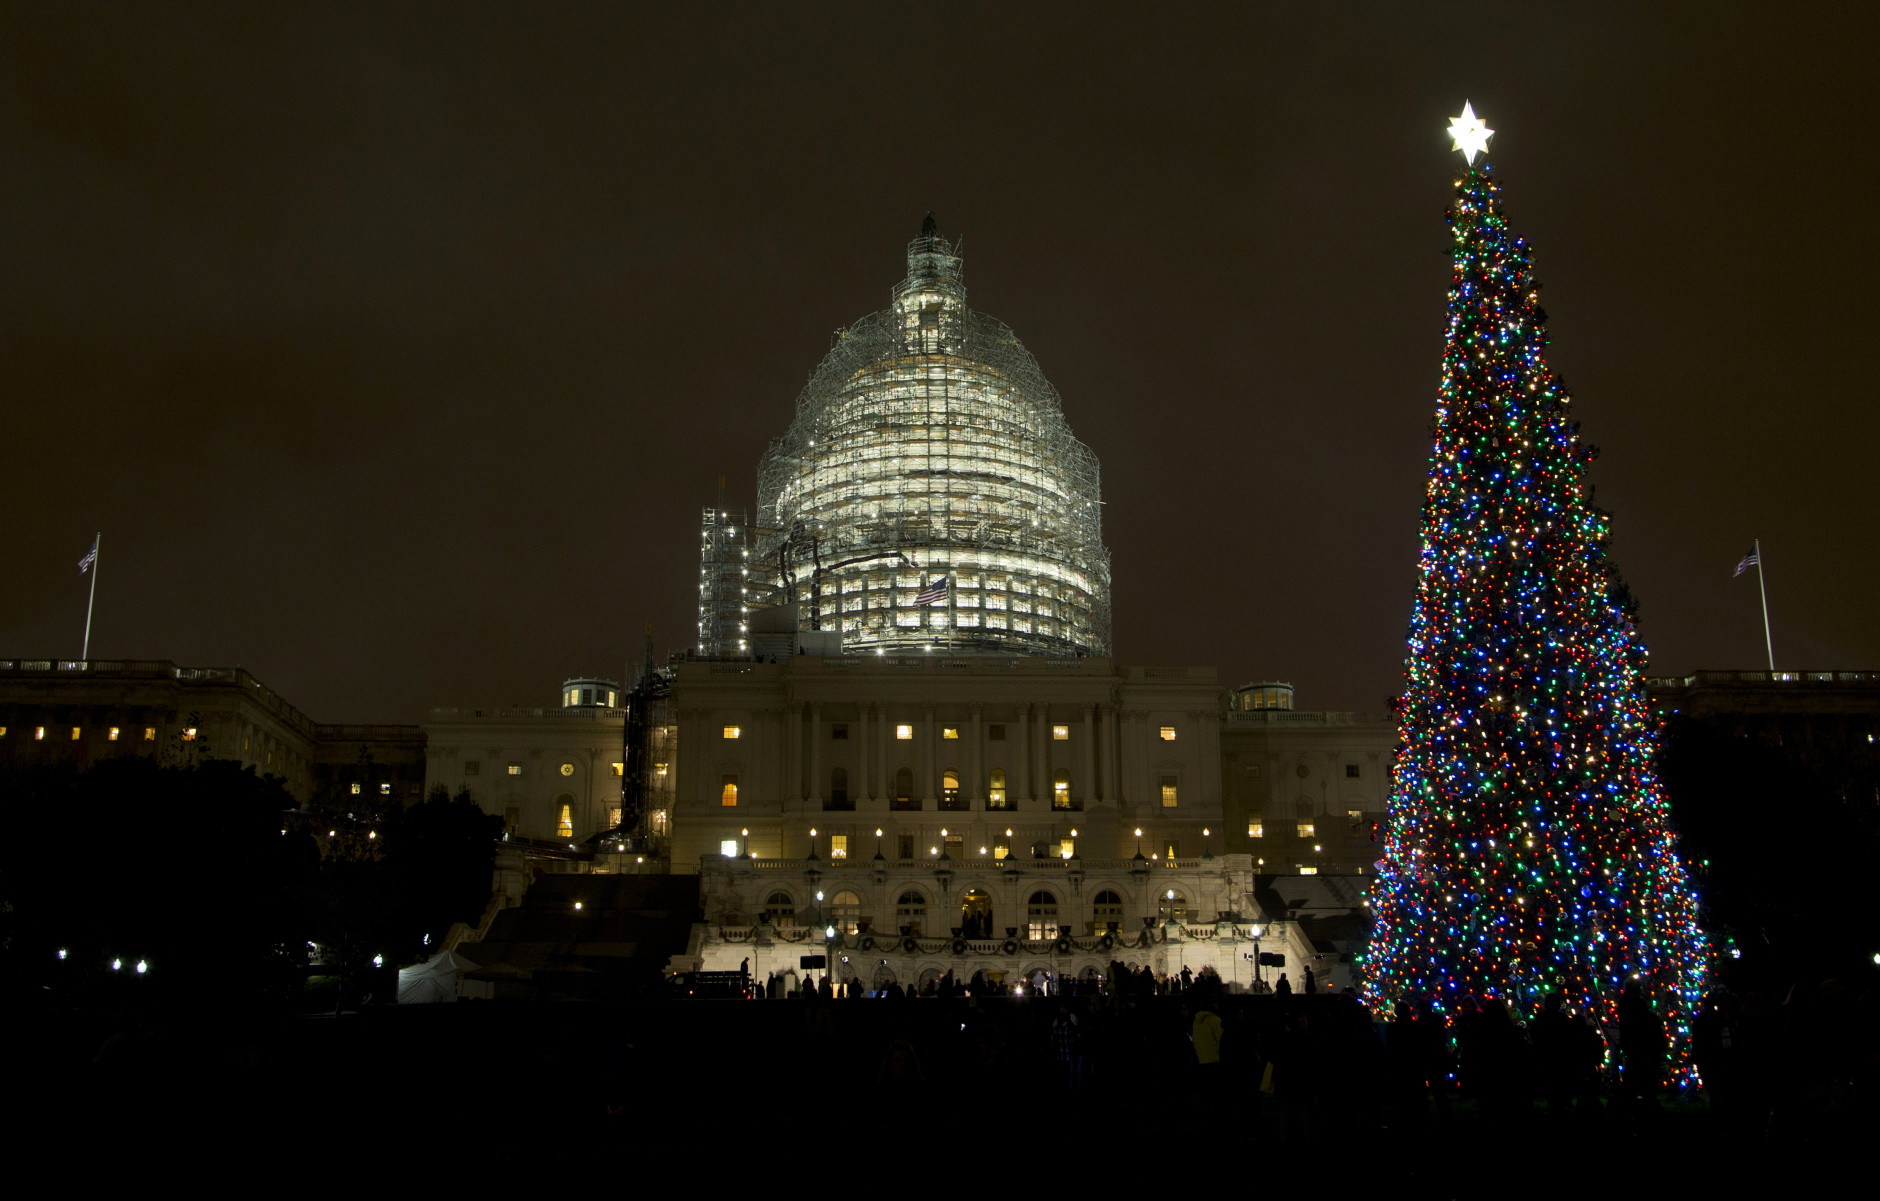 The U.S. Capitol Christmas tree is lit, after a ceremony on the West Front of the Capitol in Washington, Wednesday, Dec. 2, 2015. The 2015 U.S. Capitol Christmas Tree is a 74 feet Lutz tree from Chugach National Forest in Alaska.   (AP Photo/Manuel Balce Ceneta)